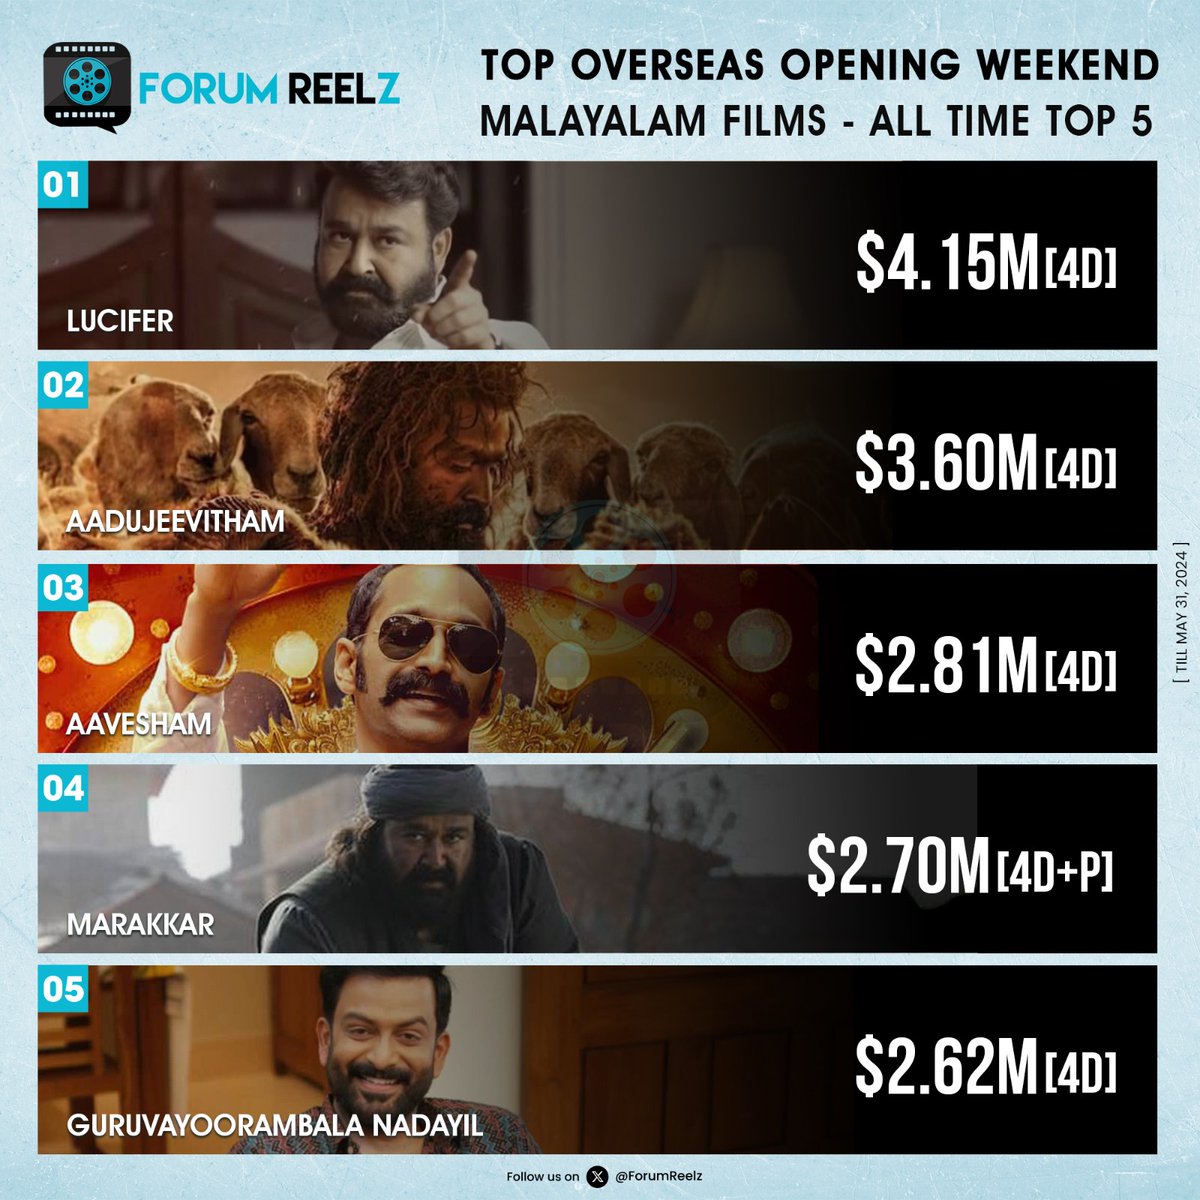 #GuruvayoorAmbalaNadayil has claimed a spot in the top five for both Mollywood's biggest global opening weekend GBOC and the top overseas opening weekend. TRULY MASSIVE! 🚀🔥